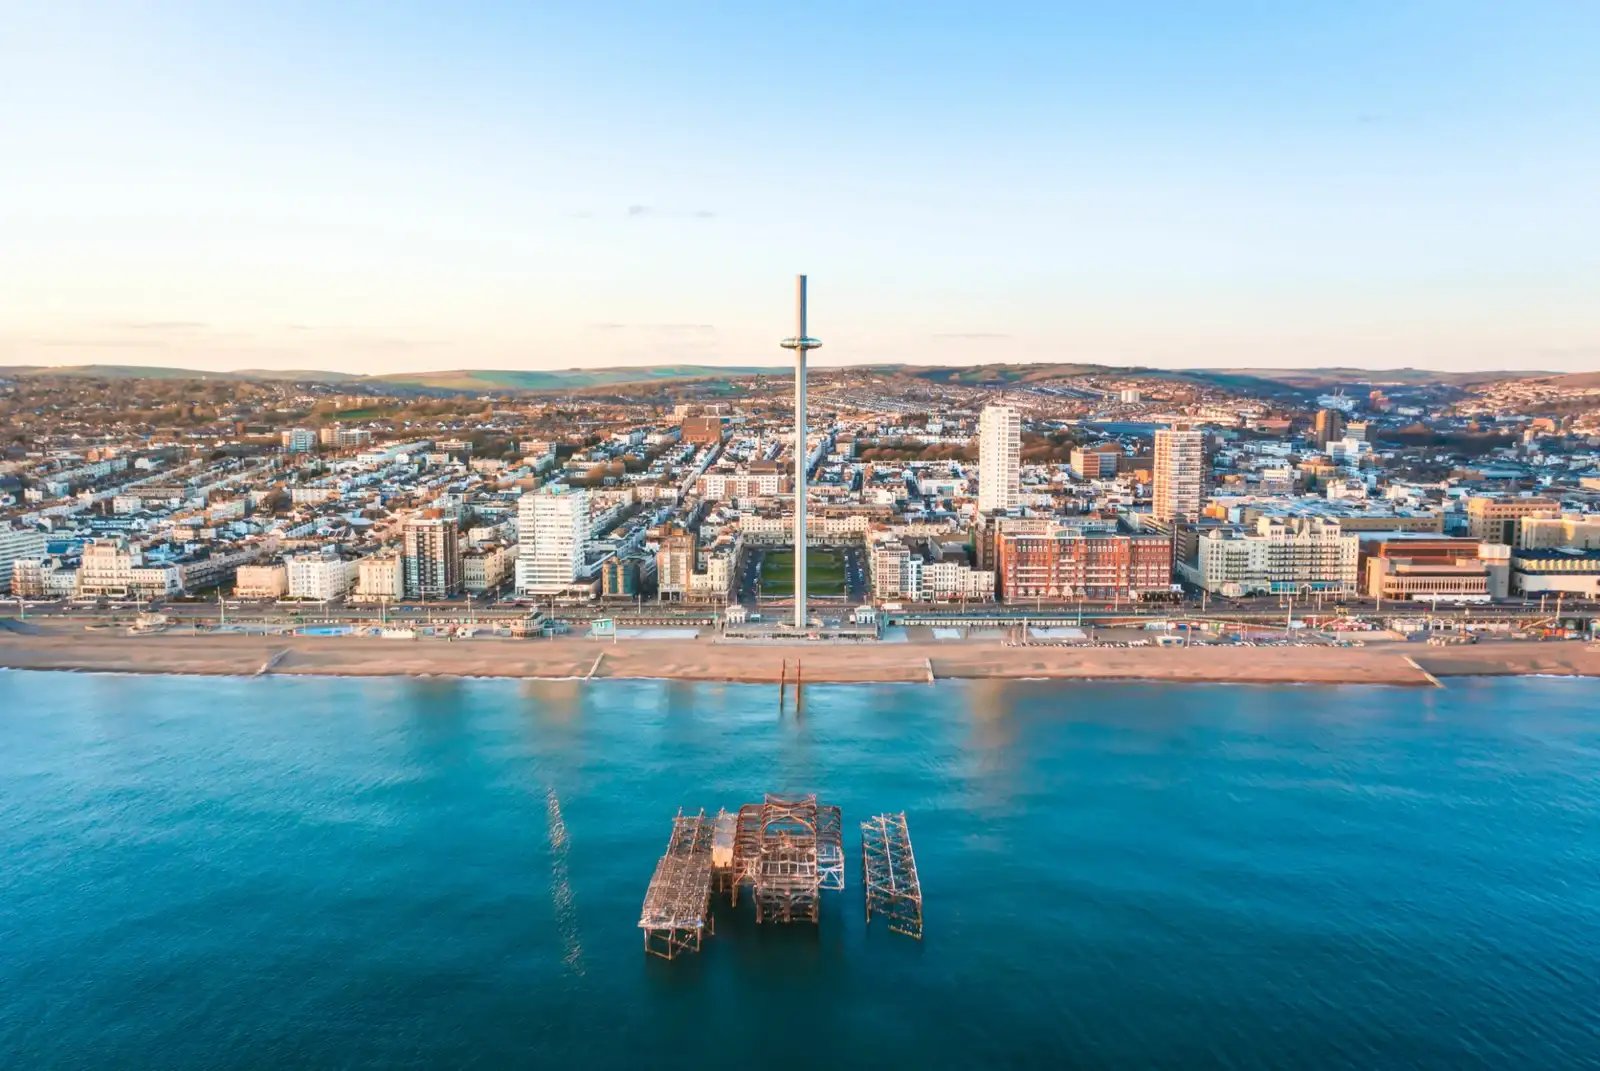 Aerial view of a coastal city with a pier and a tall observation tower during sunset.